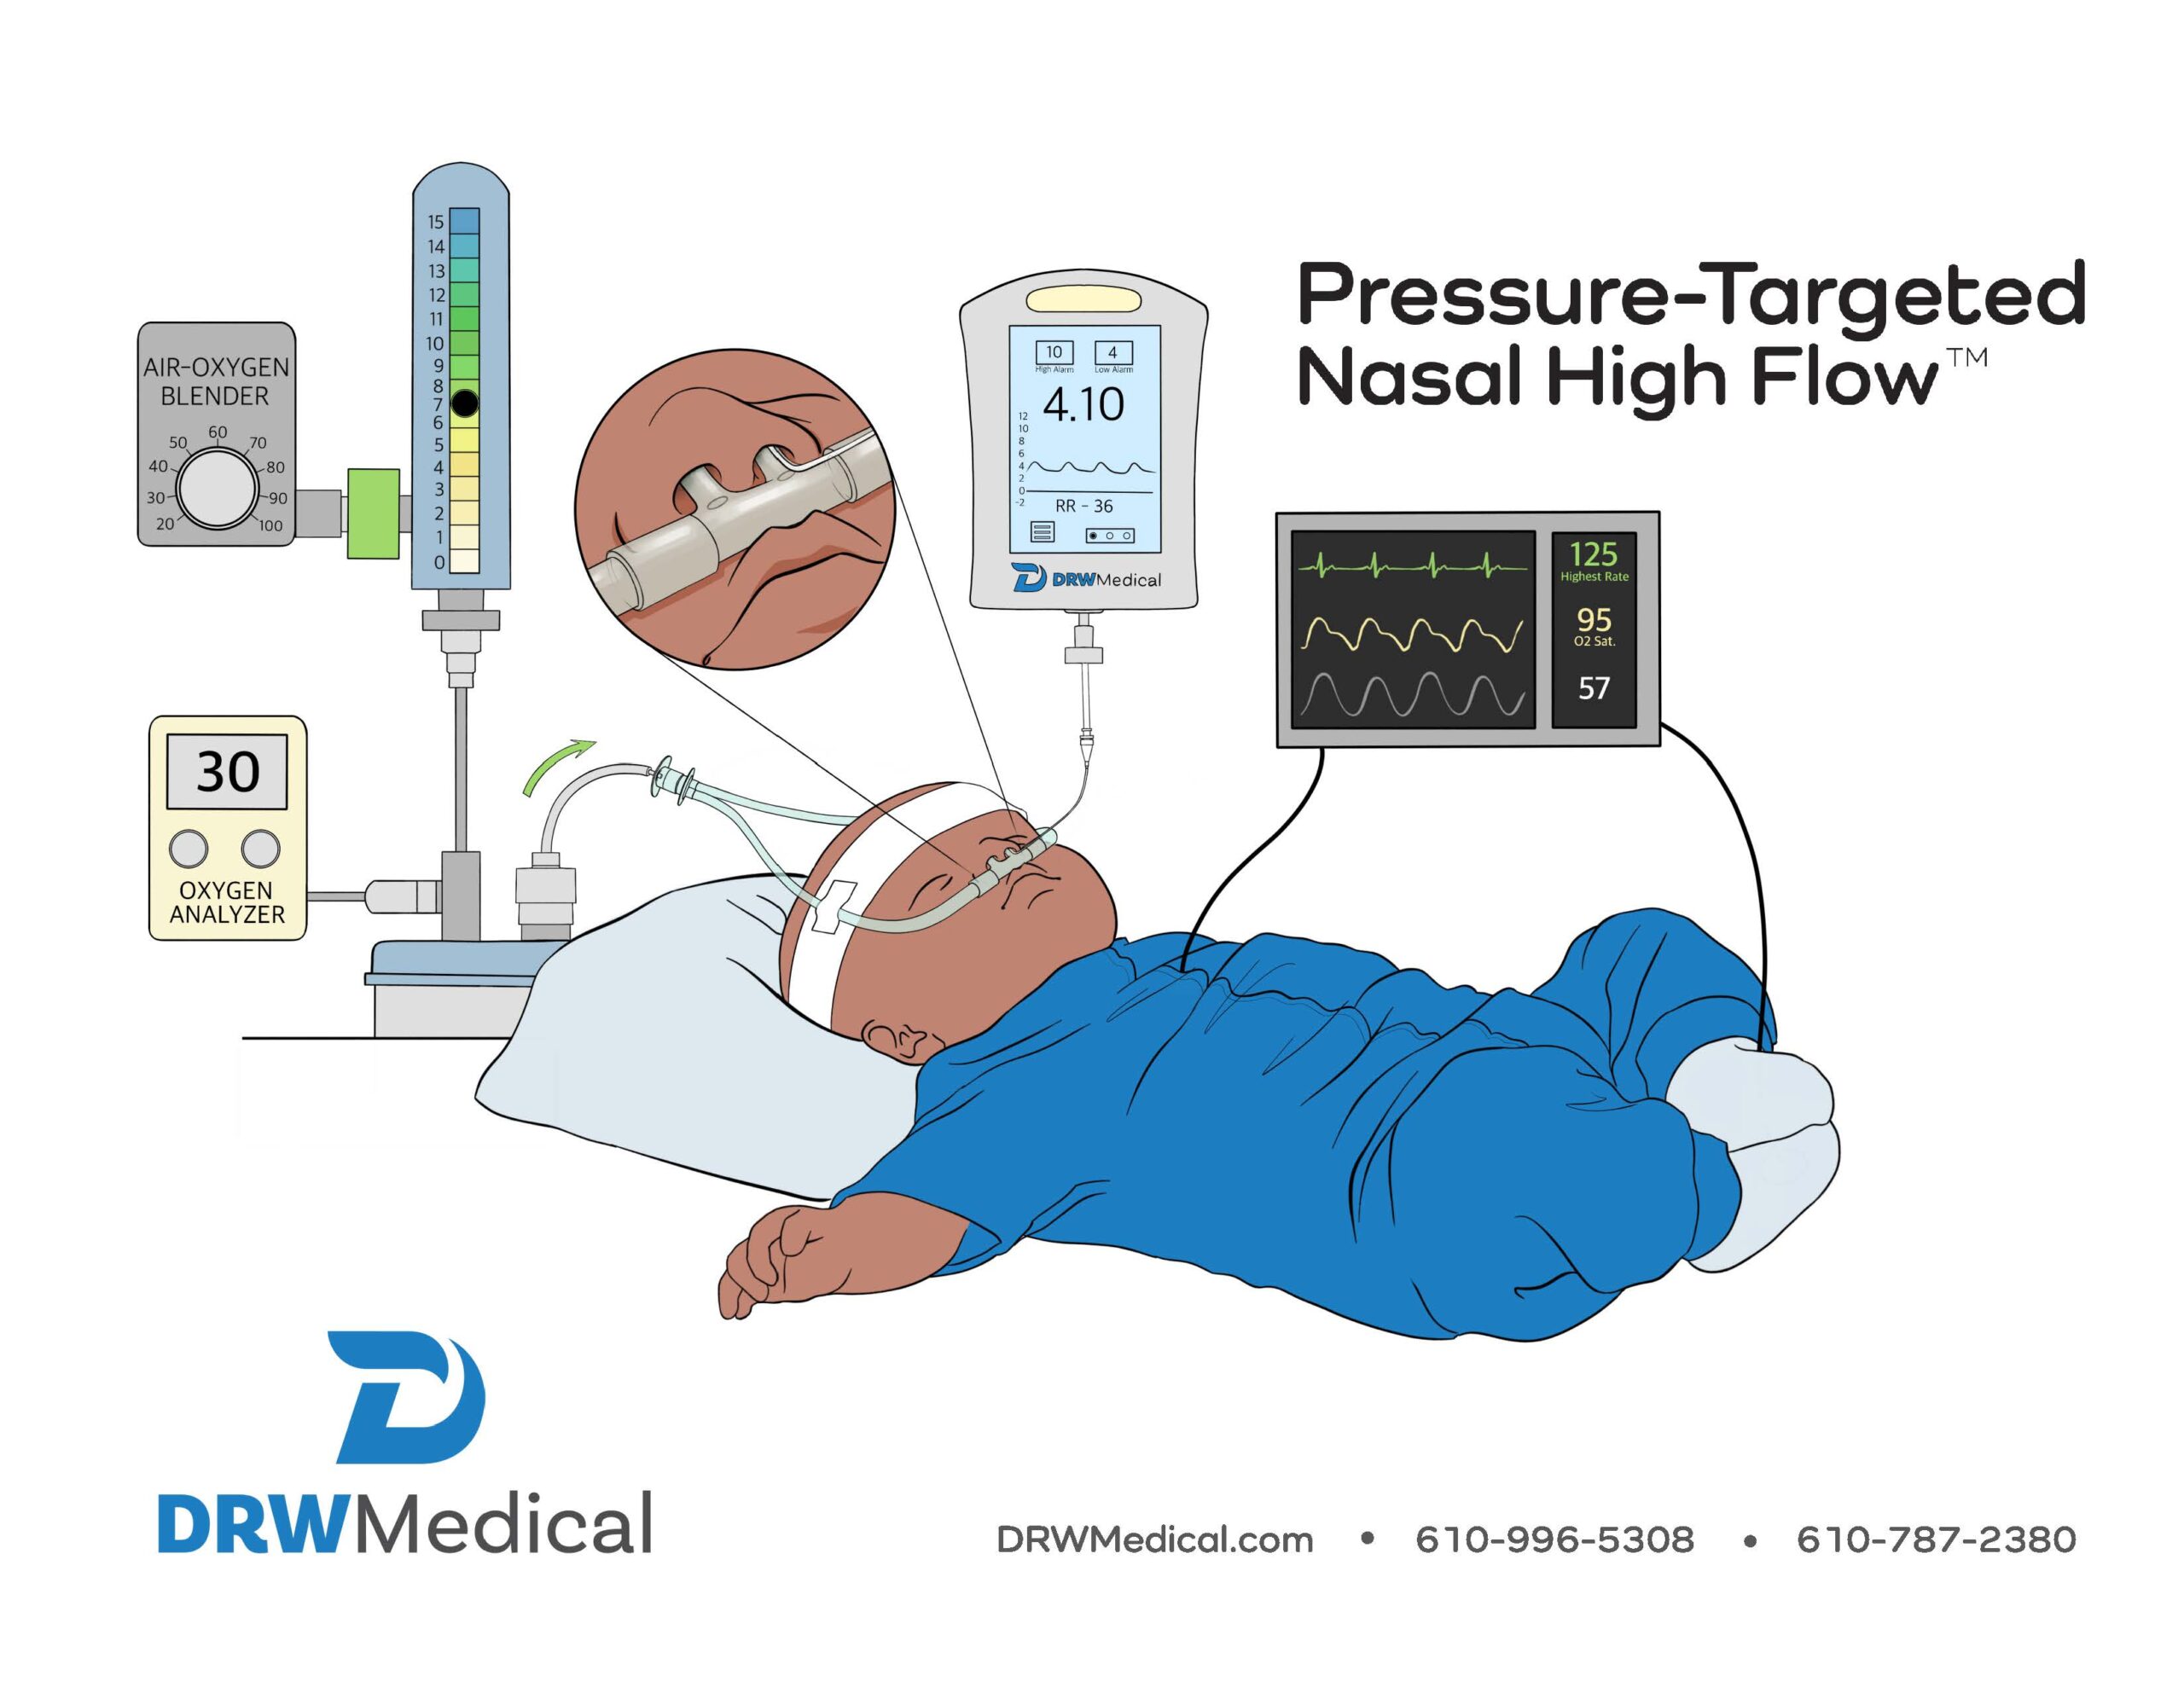 You are currently viewing DRW Medical – Pressure-Treated Nasal High Flow